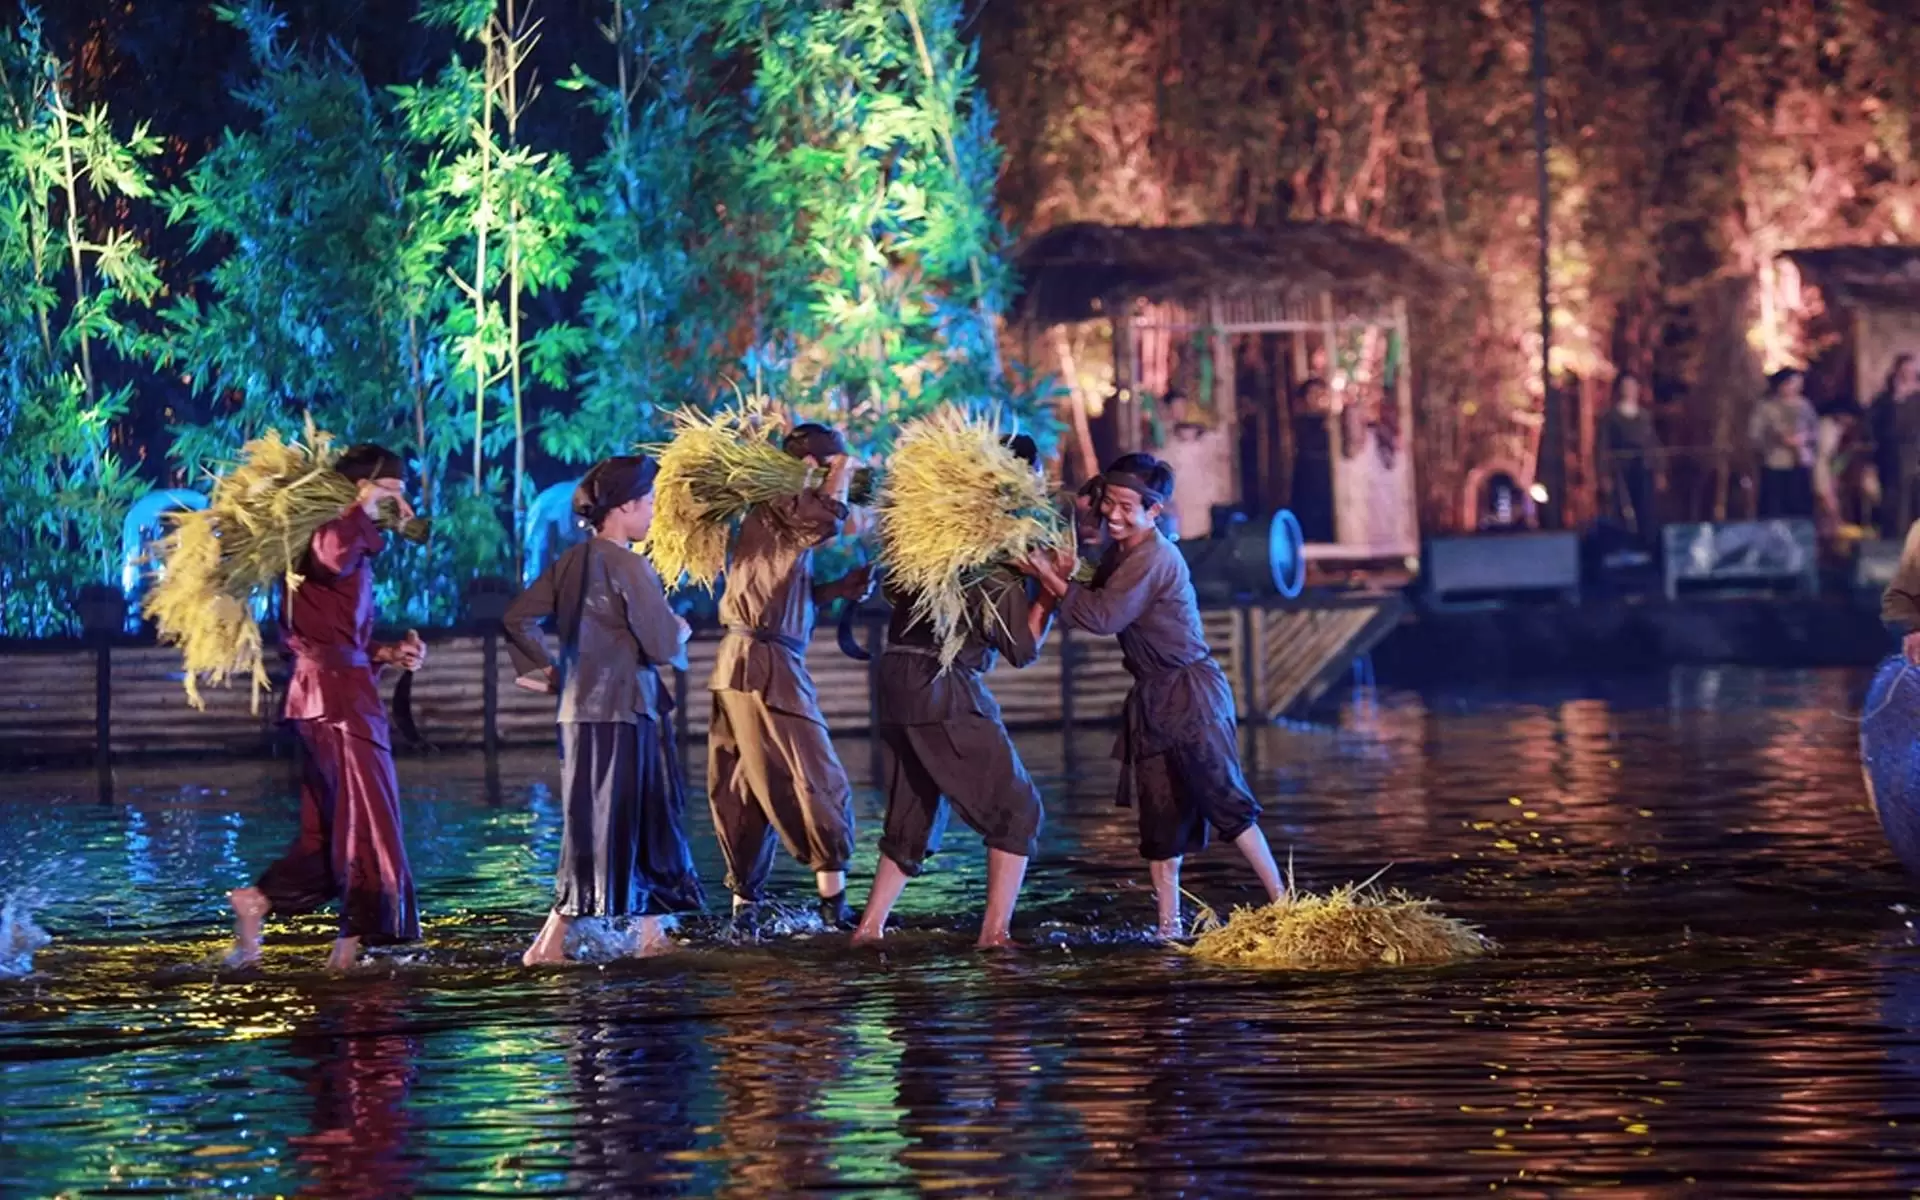 The Quintessence of Tonkin Show - A cultural experience in Hanoi AFS Travel